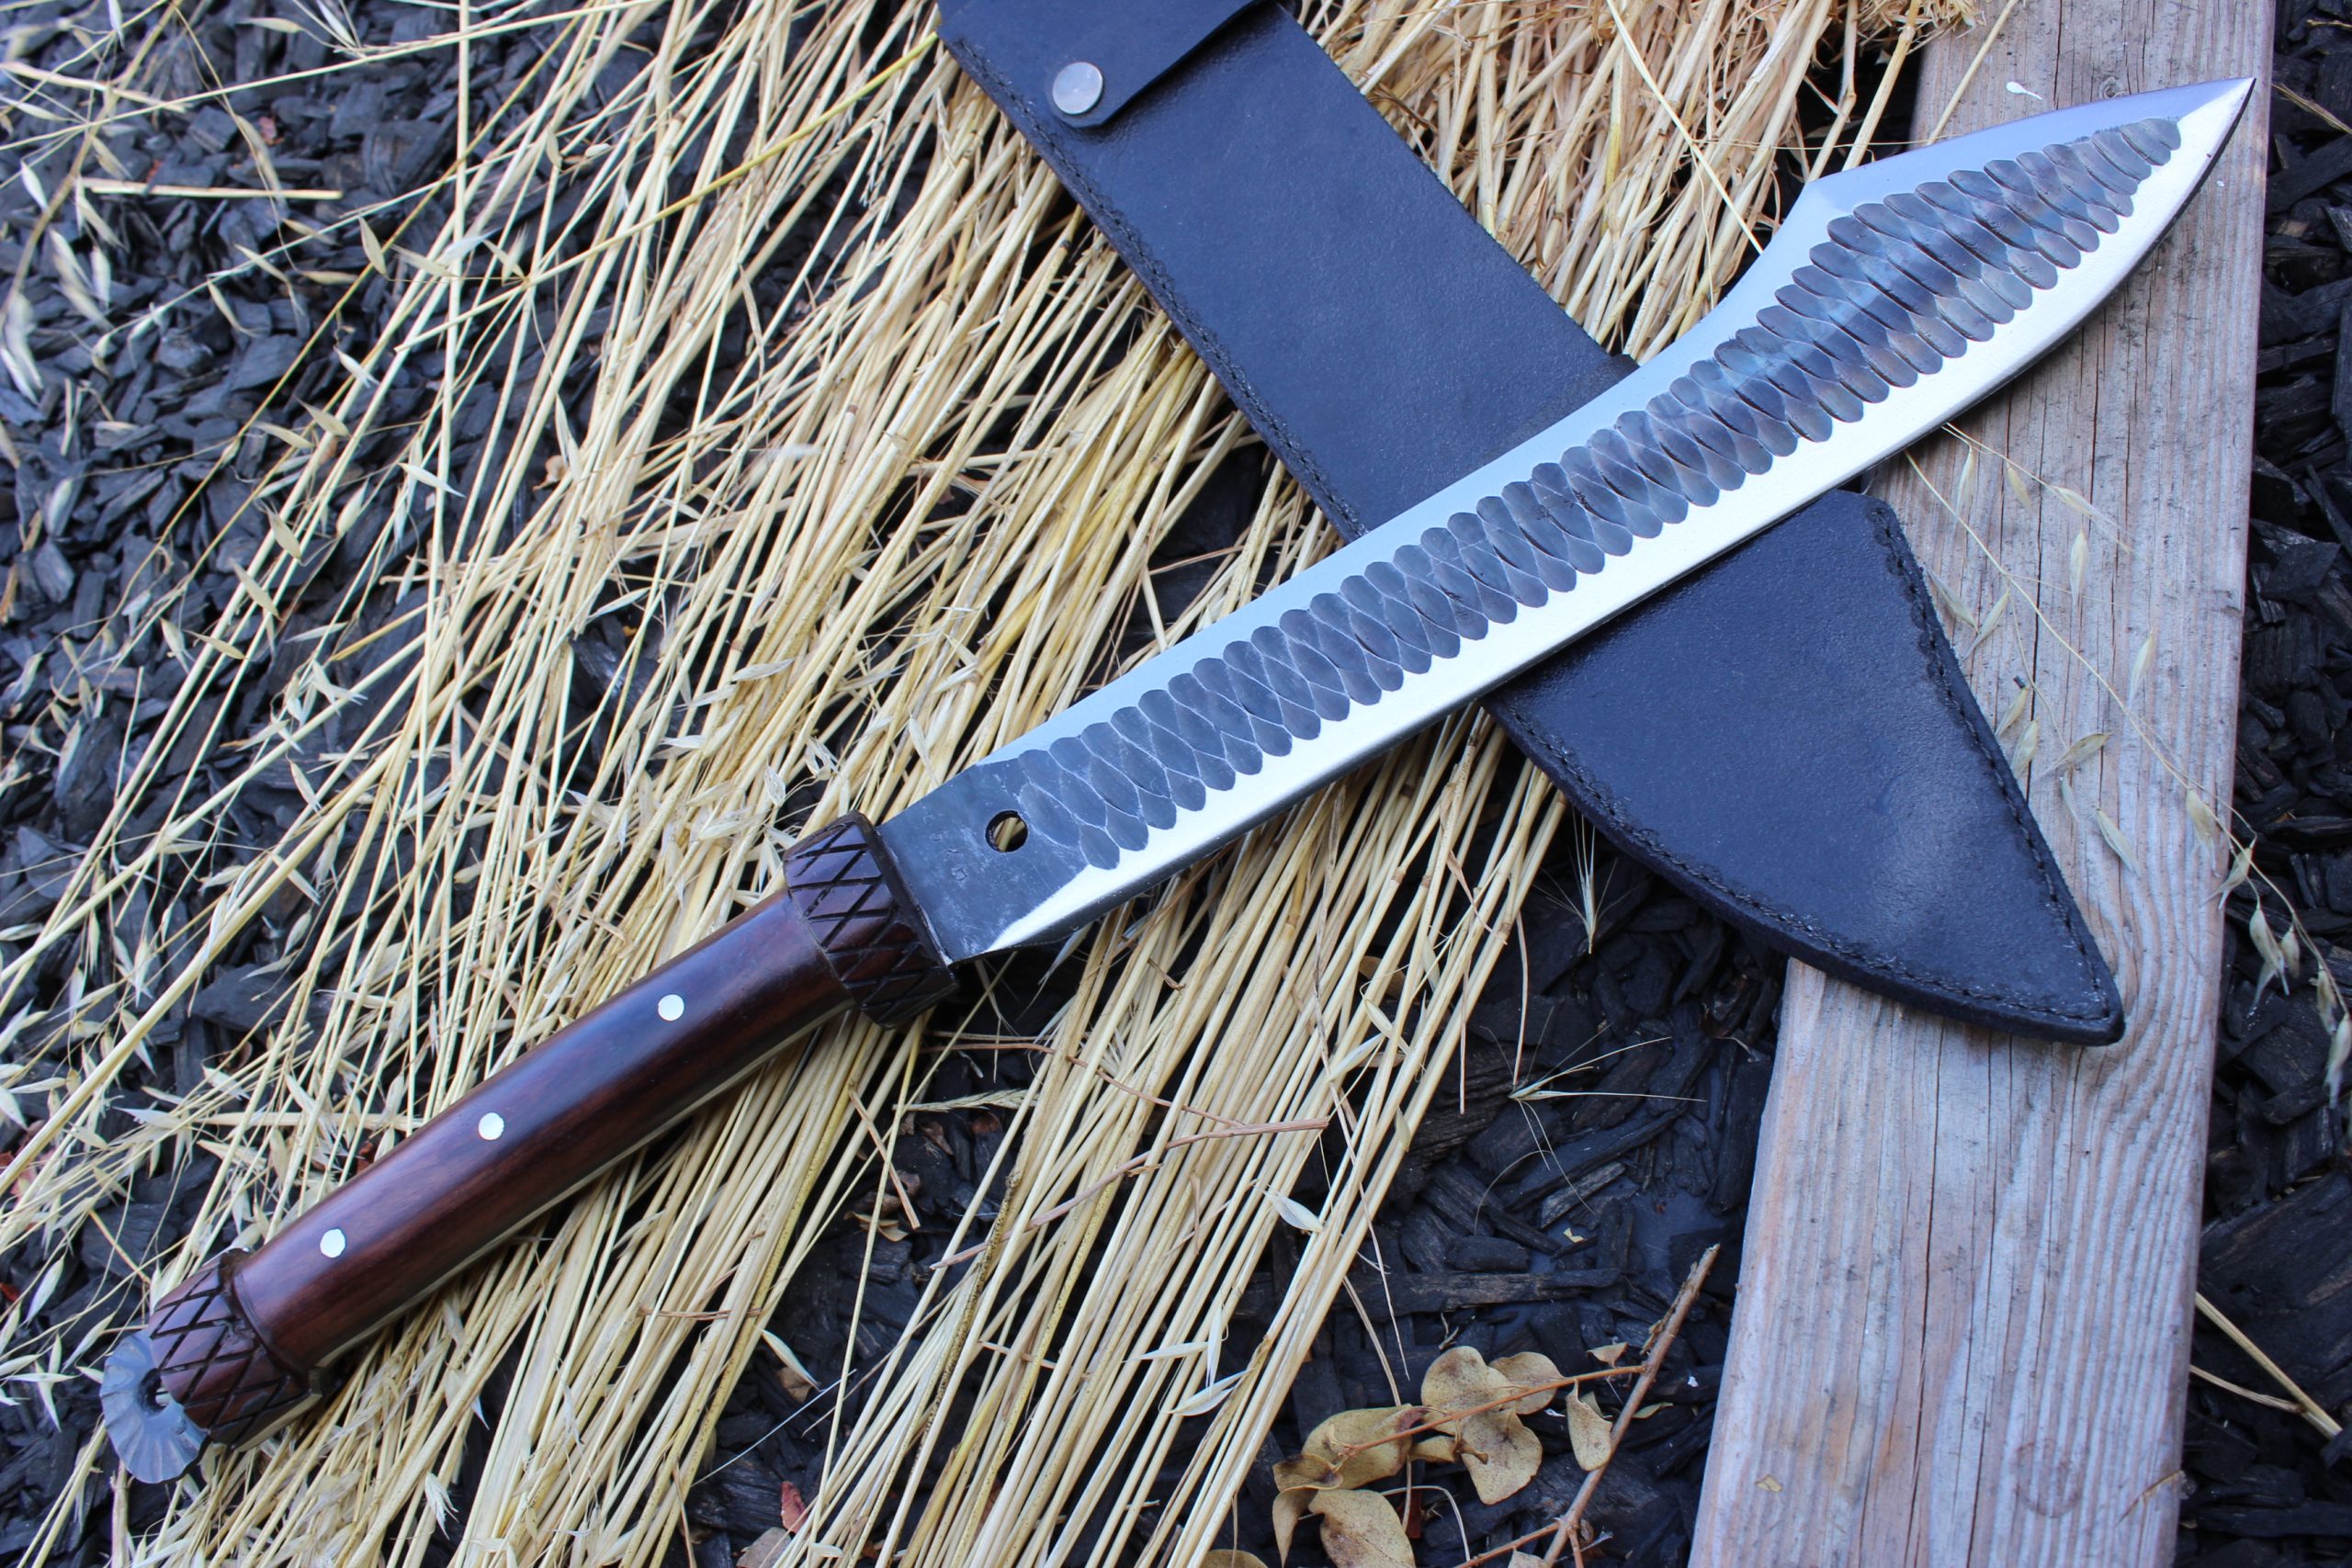 15" Expedition Cleaver - Rust Free Hand Forged Blade Machete-9748